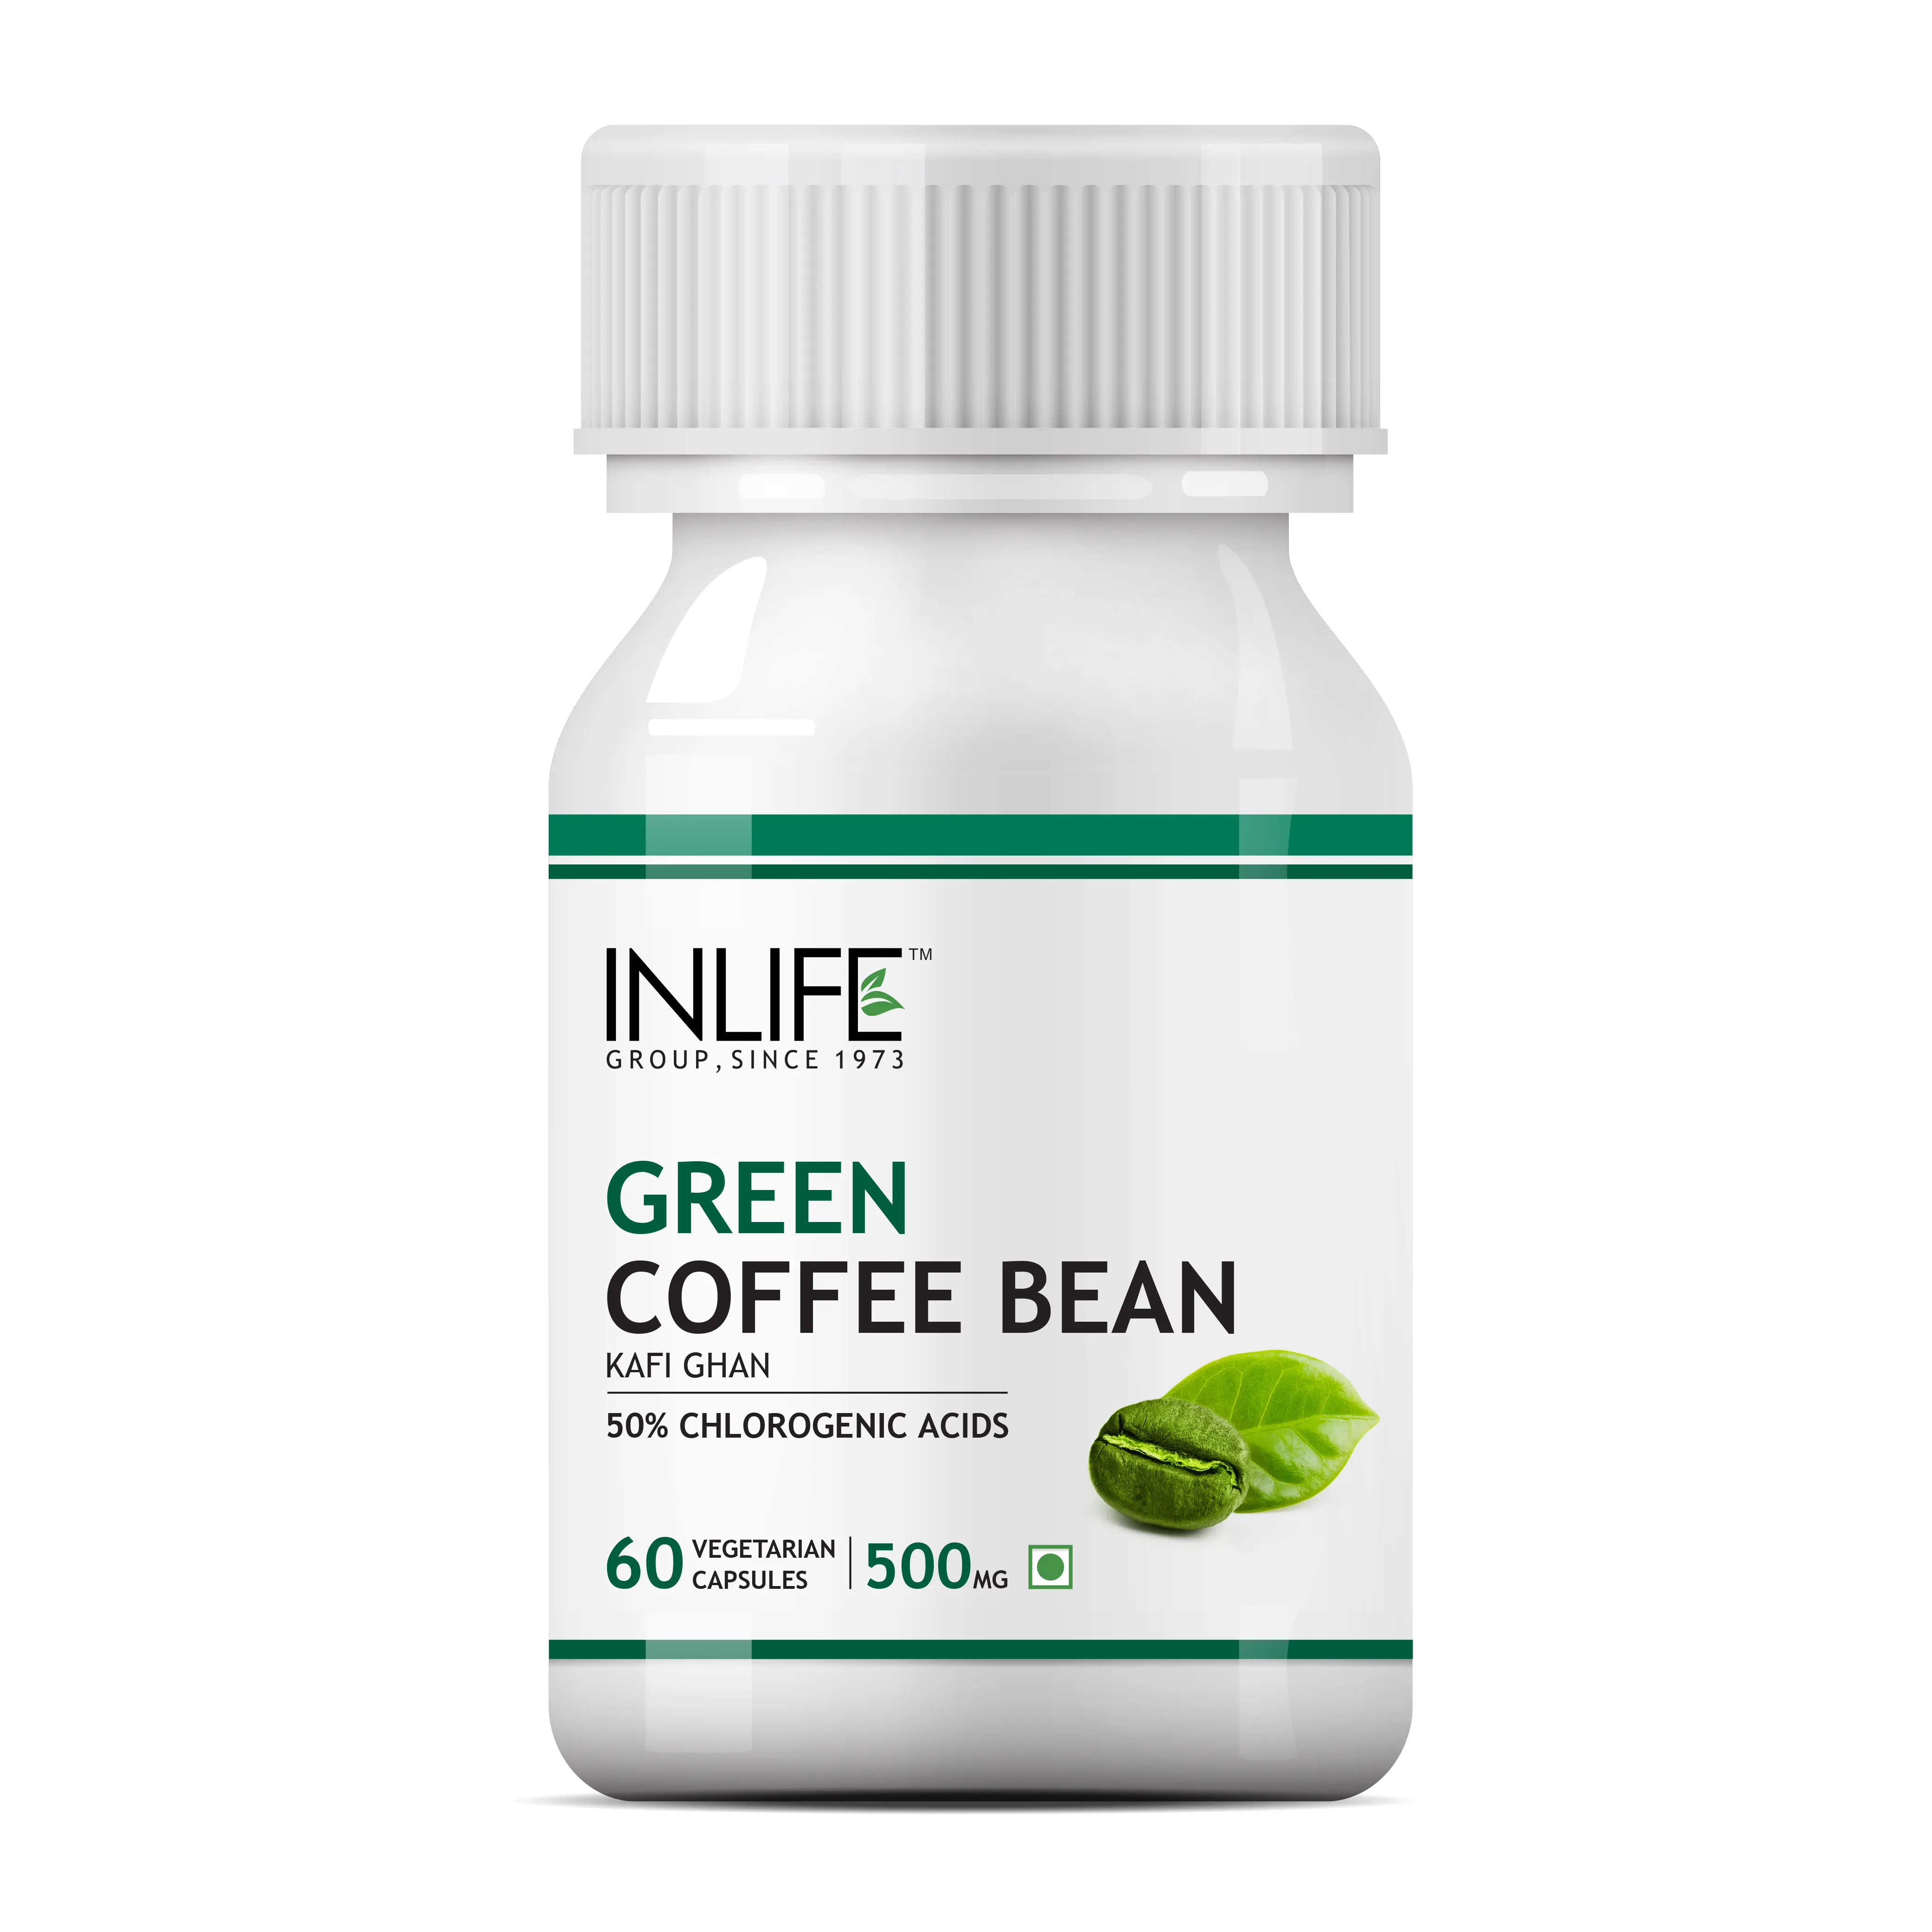 INLIFE Green Coffee Beans Extract 800MG 50% GCA (60 Veg. Capsules) Coffea Arabica Weight Supplement Herbal Supplements India